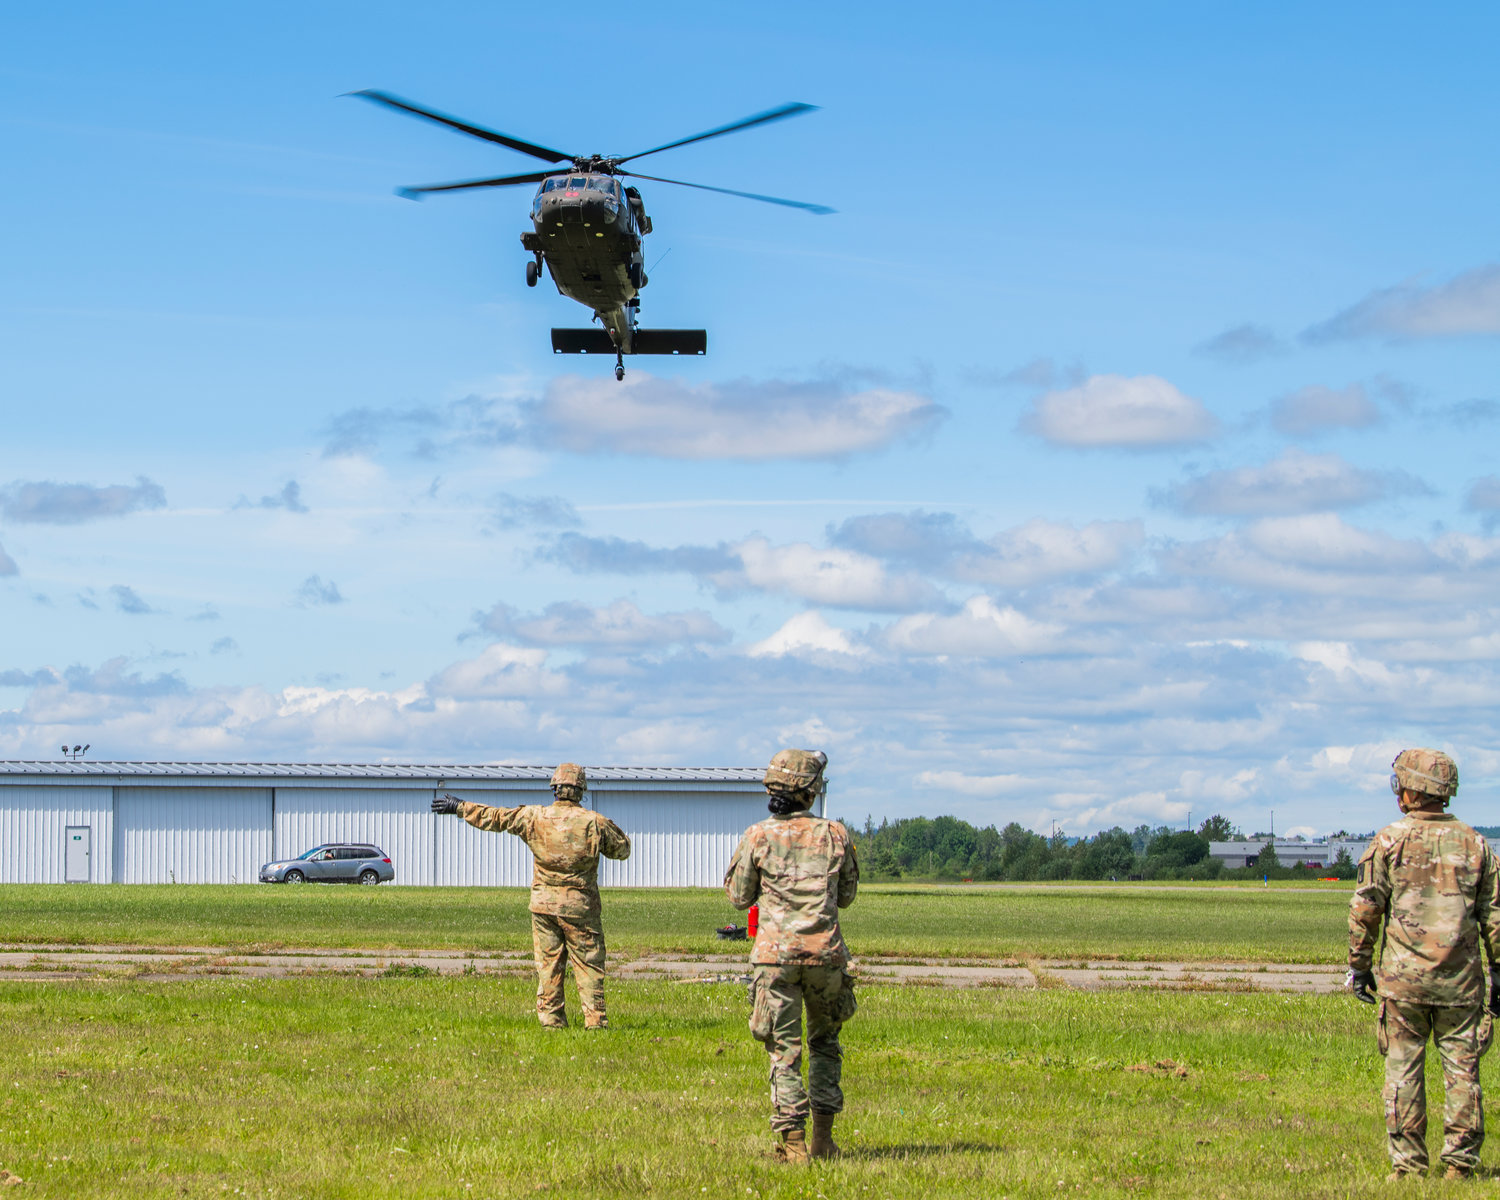 Soldiers from Joint Base Lewis-McChord participated in a training exercise at the Chehalis-Centralia Airport on on Wednesday, June 22.